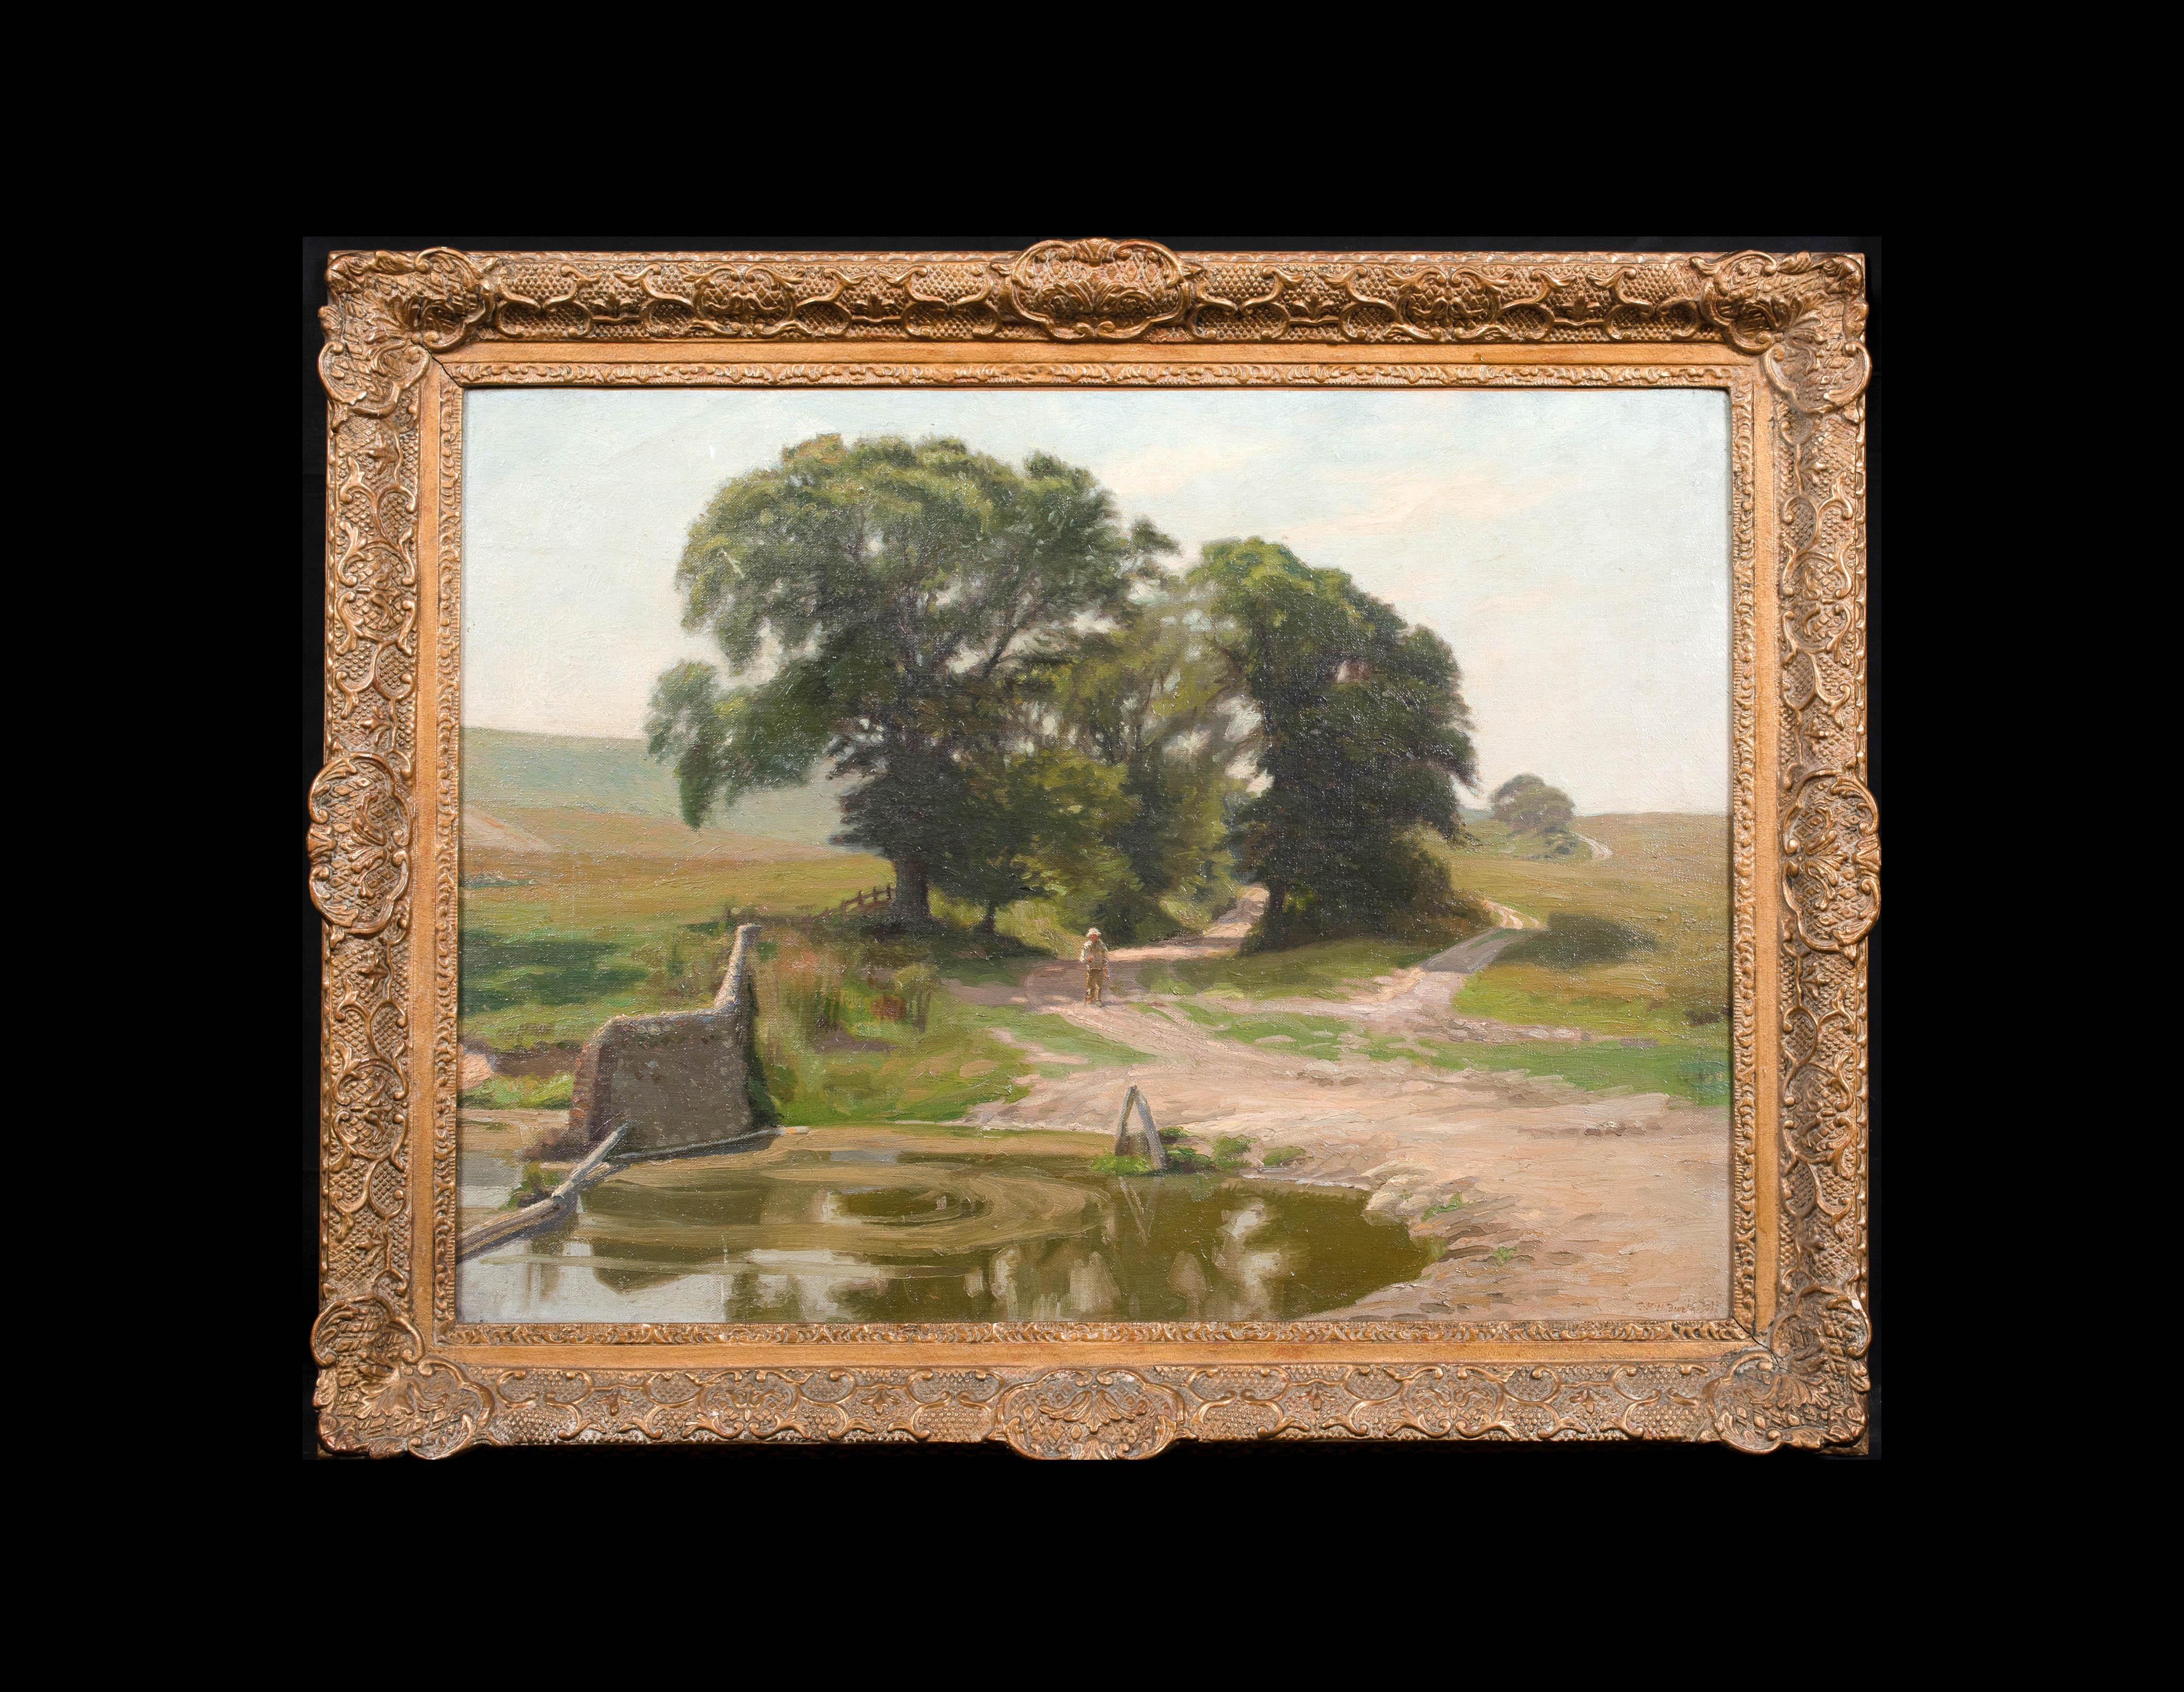 A Dorset Watering Hole, early 20th Century   by CHARLES HENRY HARRISON BURLEIGH  - Painting by Charles H. Harrison Burleigh